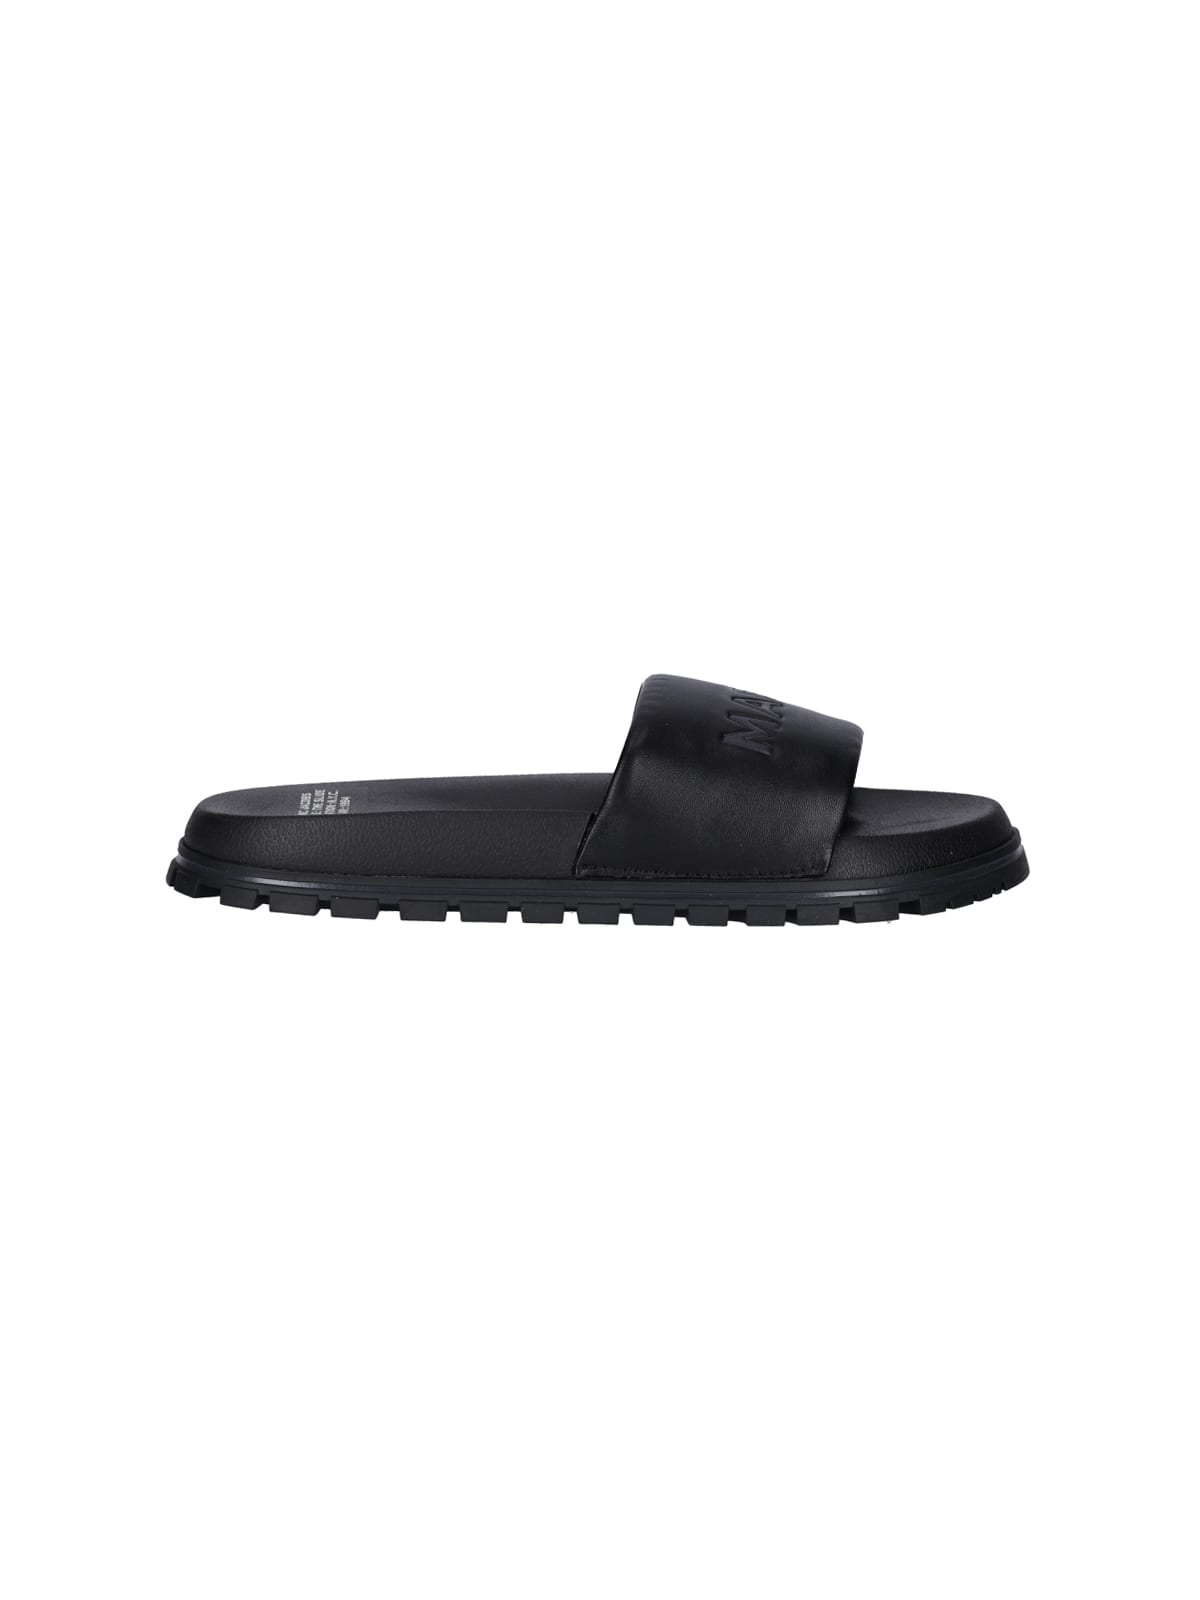 MARC JACOBS SLIDE SANDALS THE LEATHER